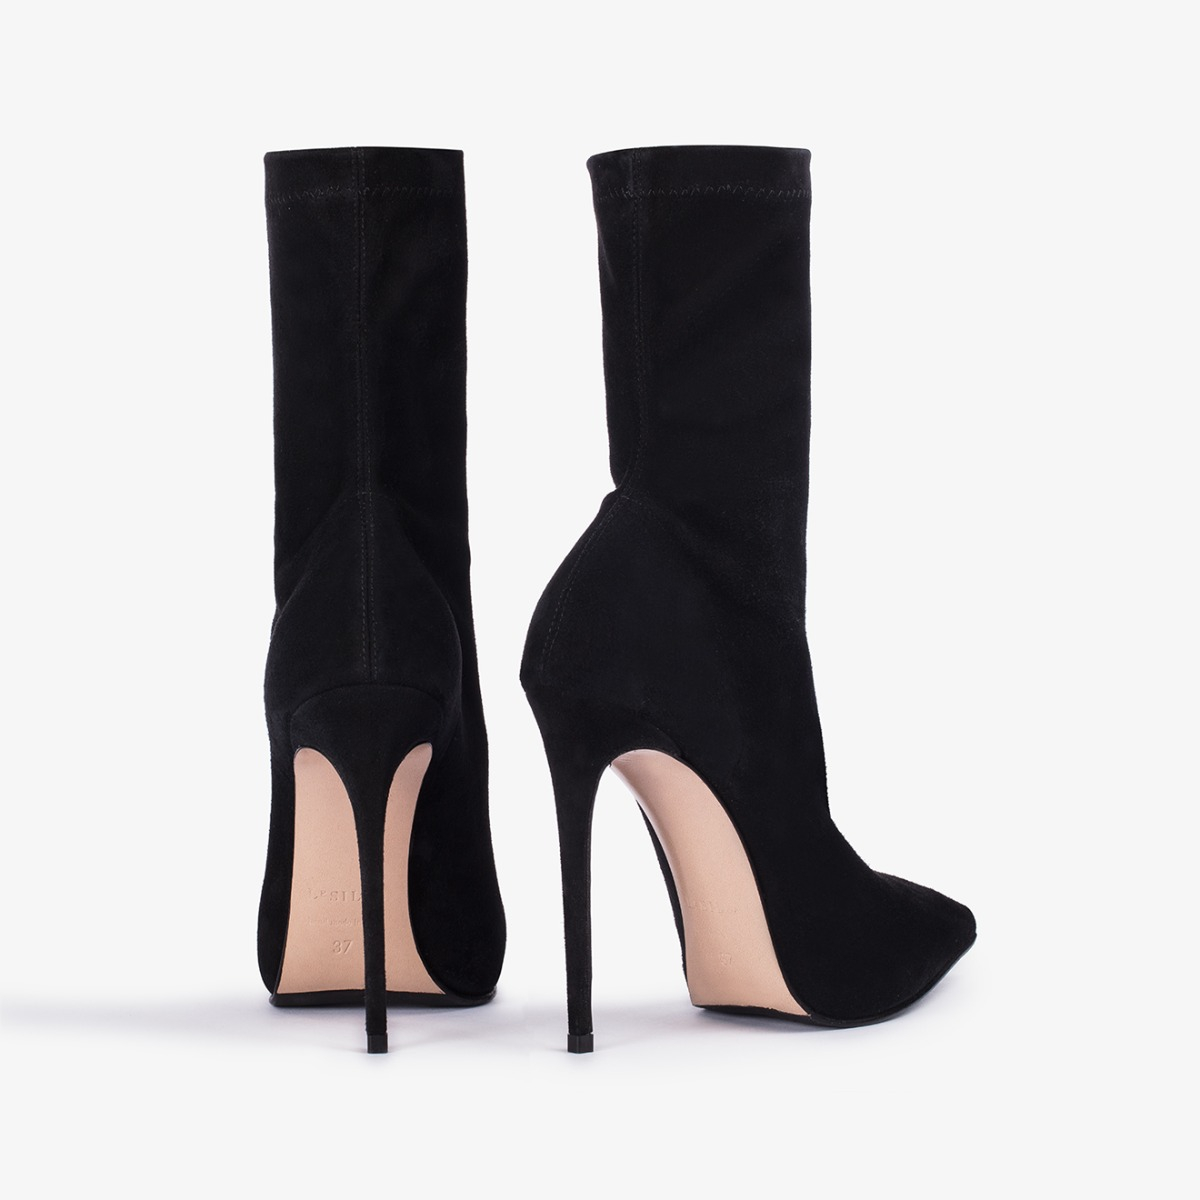 EVA ANKLE BOOT 120 mm - Le Silla | Official Online Store